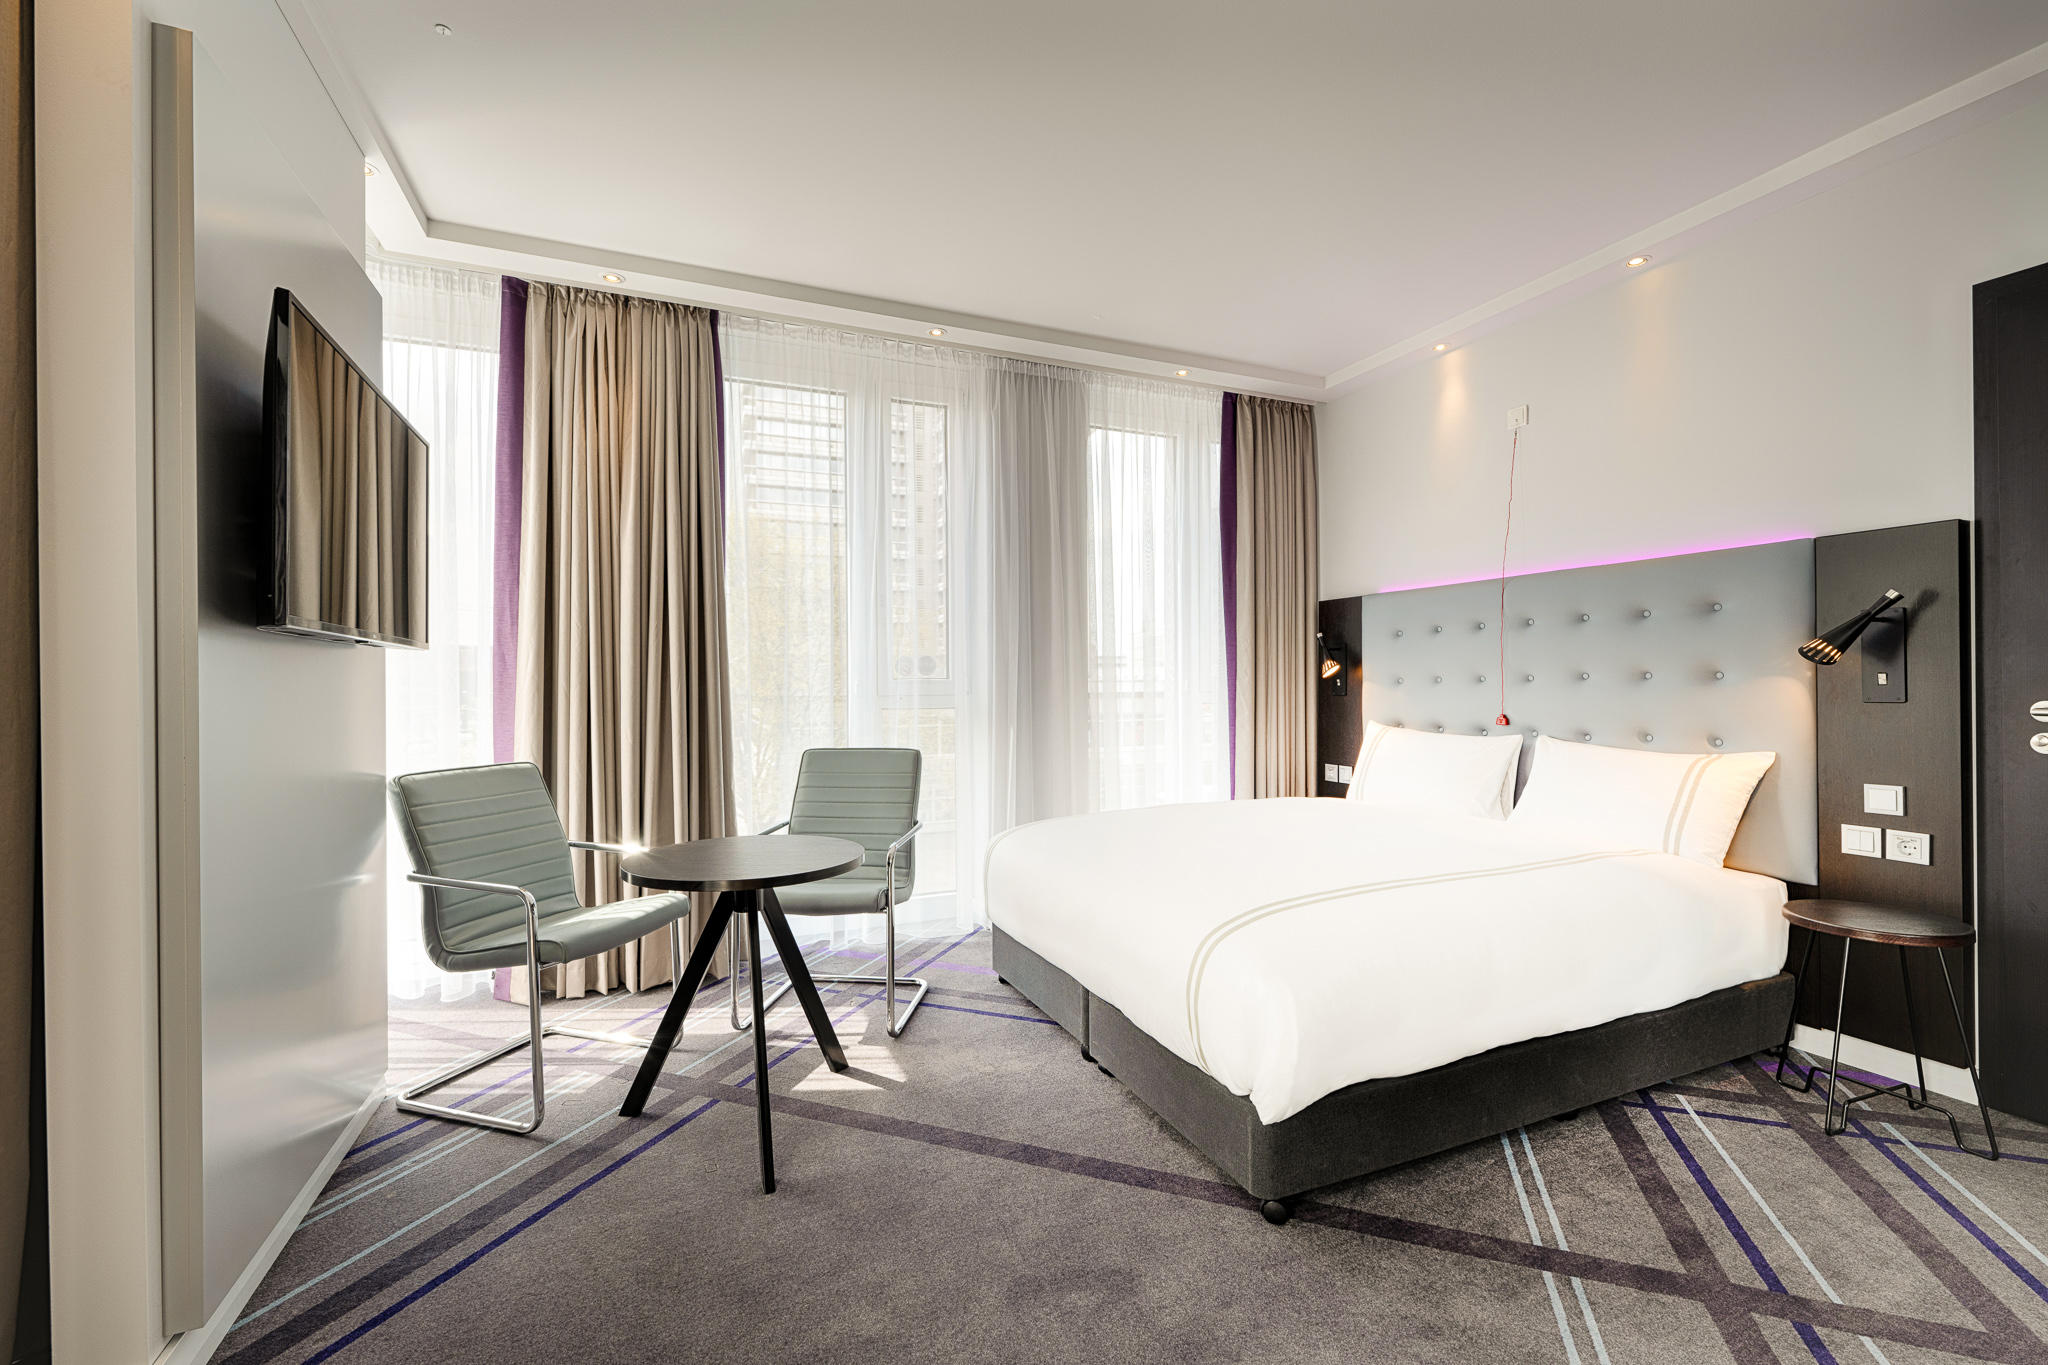 Premier Inn Berlin Alexanderplatz hotel  accessible room with lowered bed